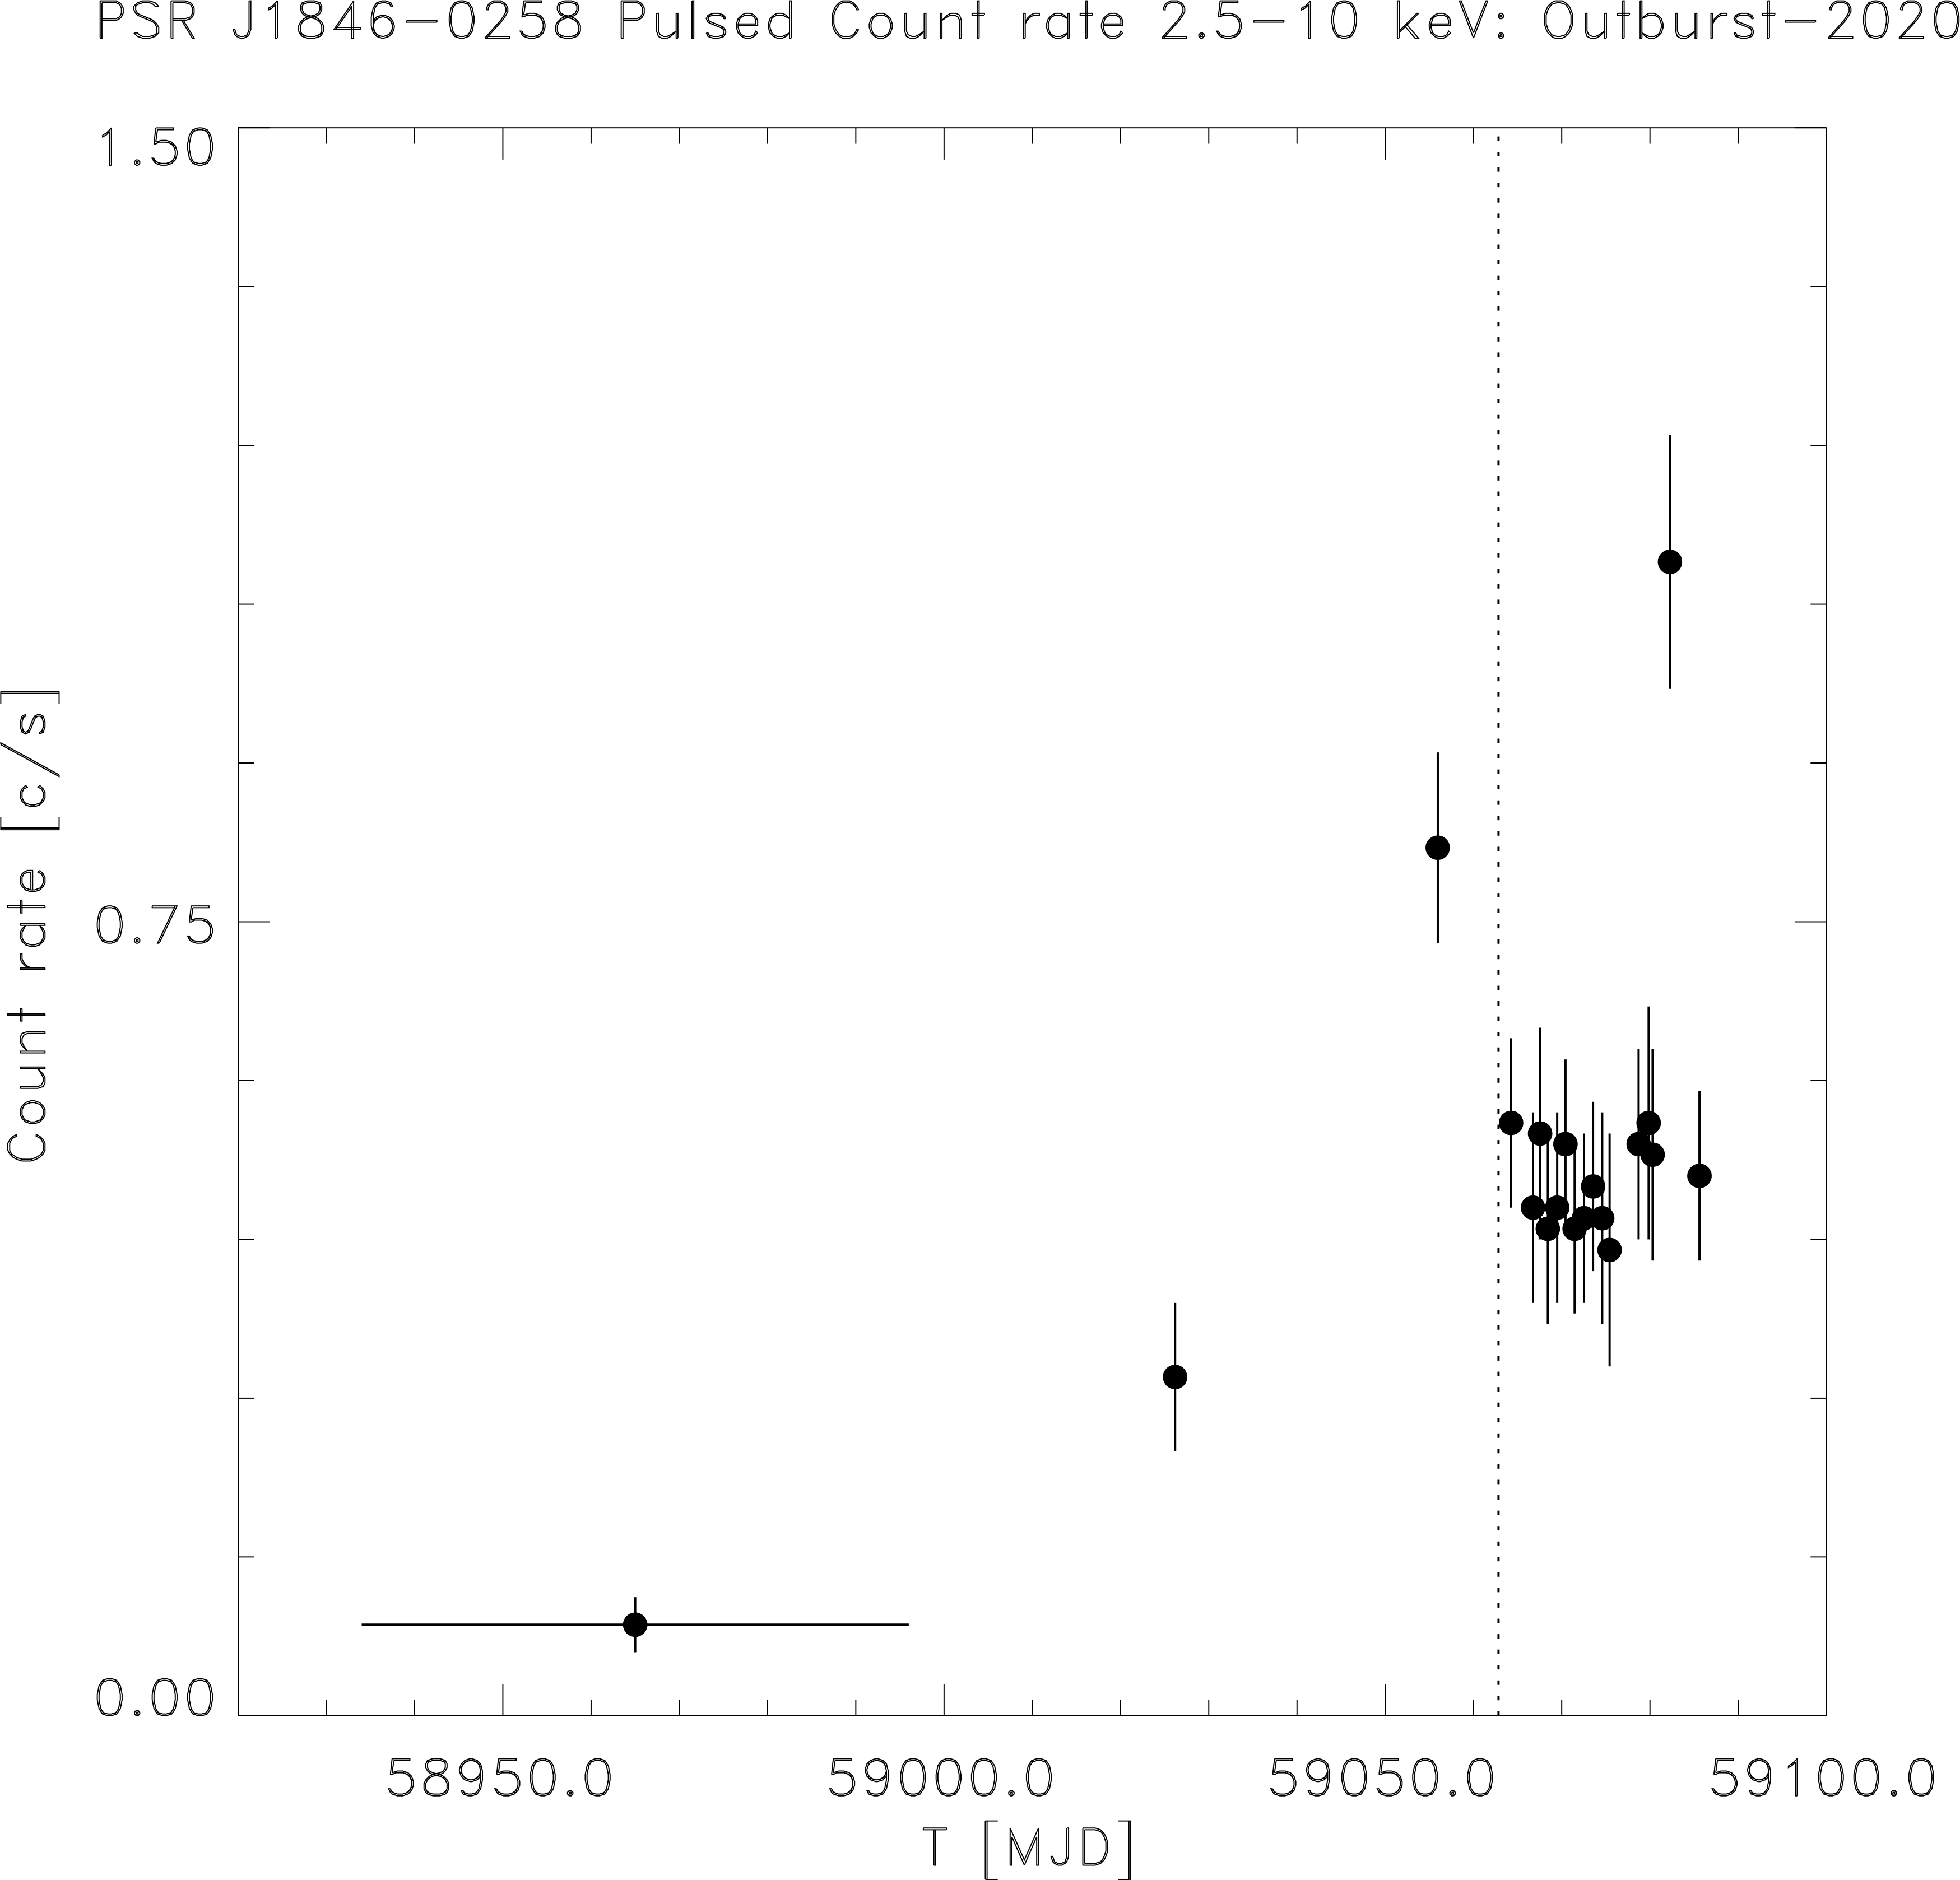 NICER measured pulsed X-ray flux from PSR J1846-0258 in the 2.5-10 keV energy band, including GO observations beginning in March 2020 as well as densely sampled TOO observations after the Swift flare detection on August 1st (dotted line) through to August 24th (Modified Julian Date or MJD 59085).